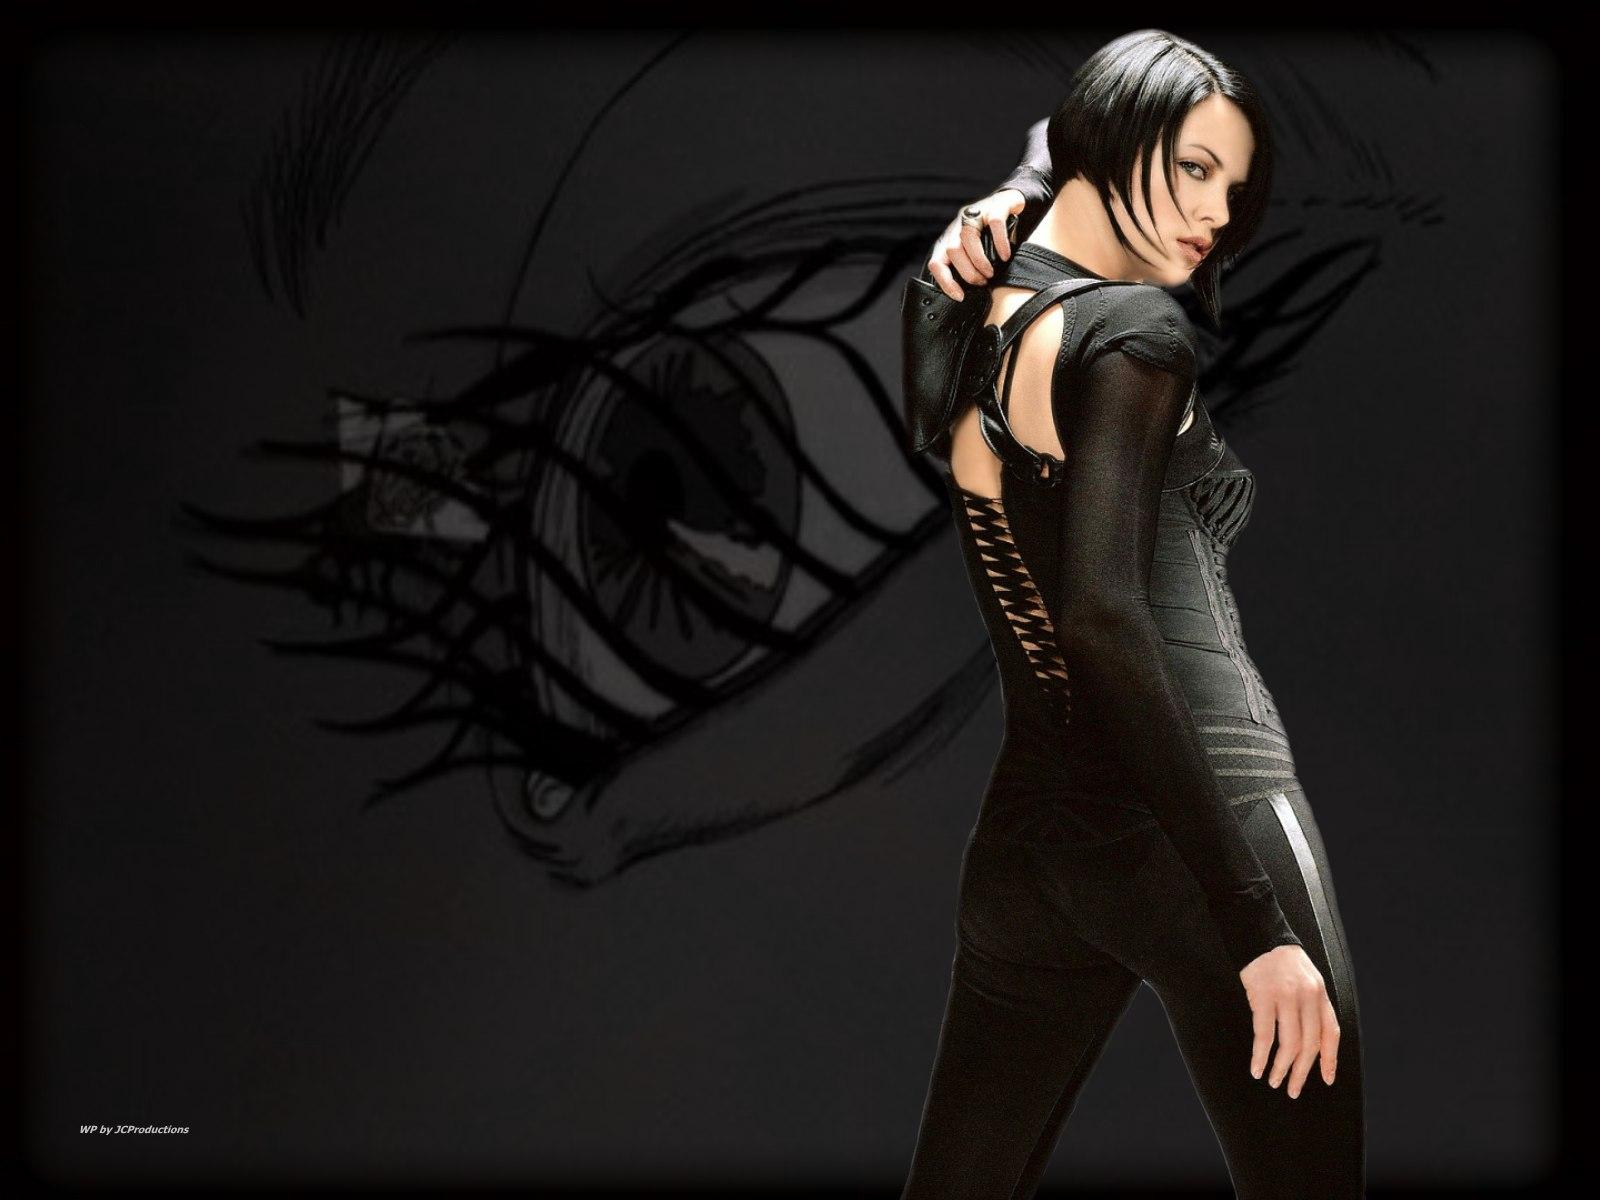 Aeon Flux image Aeon Flux HD wallpaper and background photo